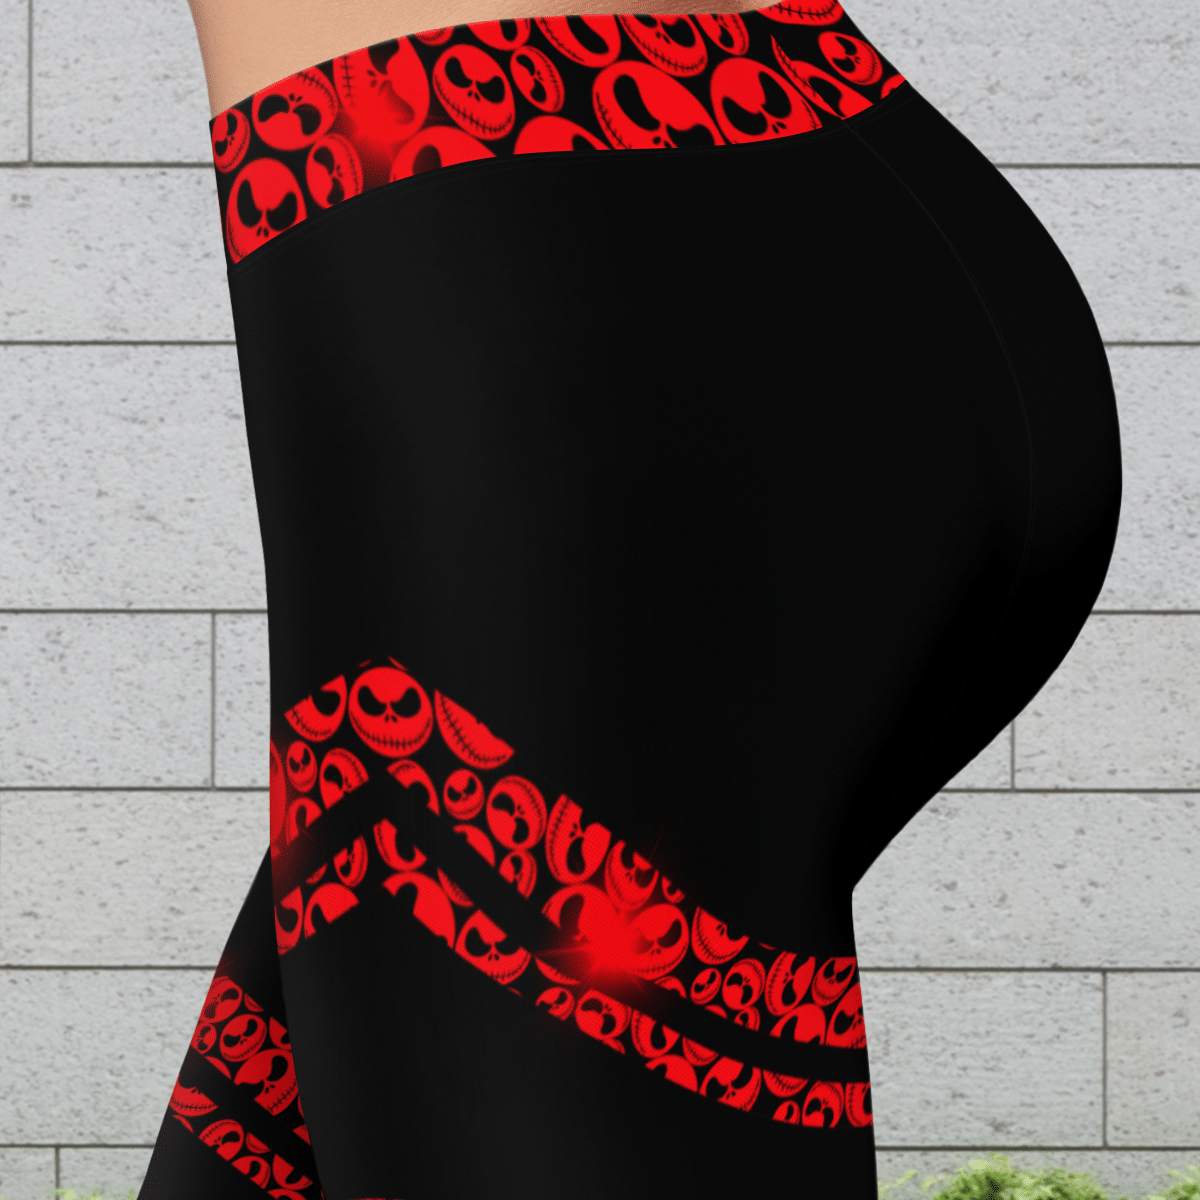 Red Fashion Hollow Out Leggings